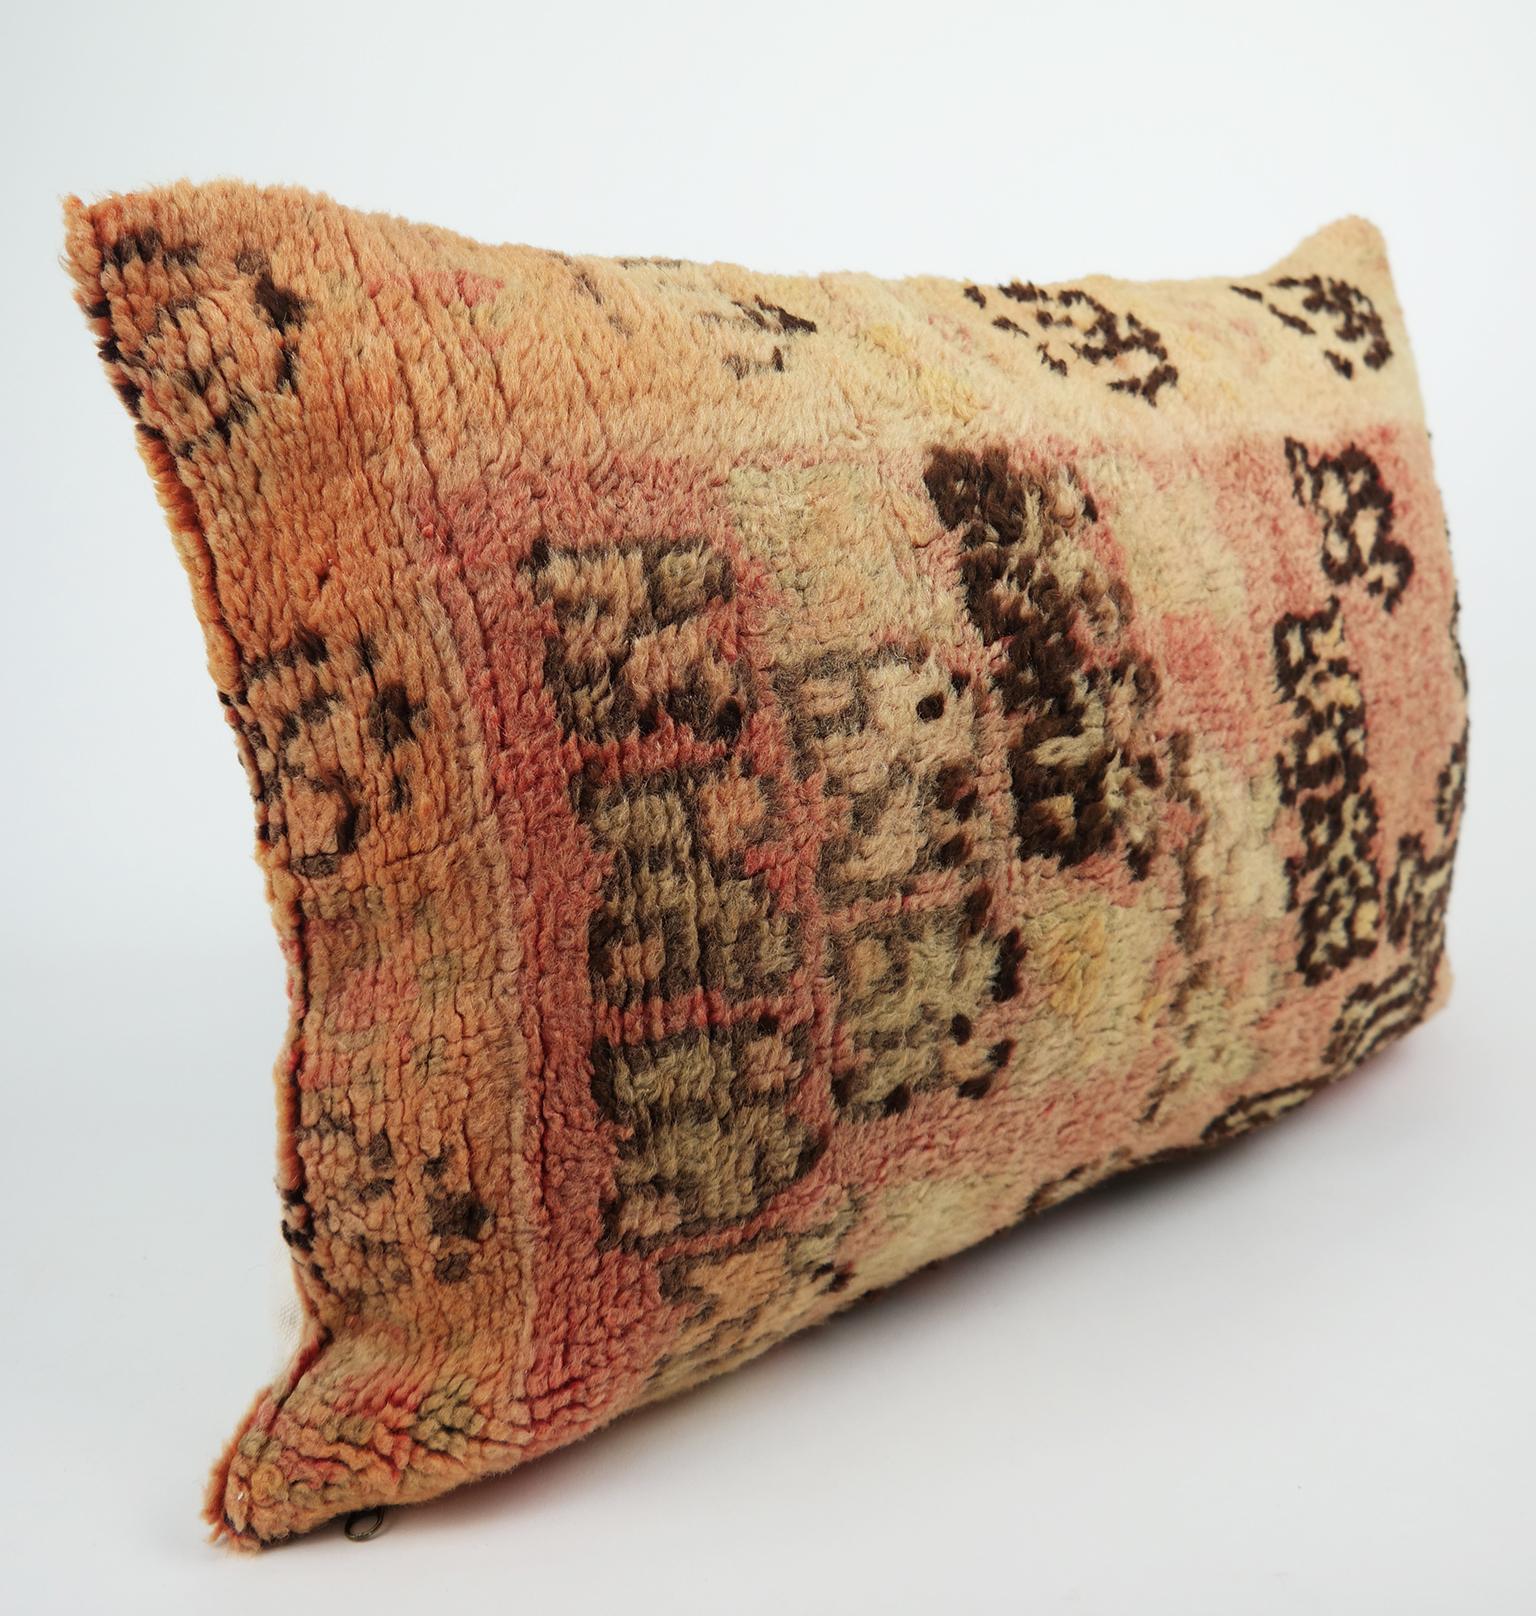 Cushion custom-made from a more than 40 years old Moroccan rug. The rug is searched and selected by ourselves. This pillow is a one-of-a-kind with beautiful warm colors. shades of warm orange, faded pink, chocolate brown, sand and vintage